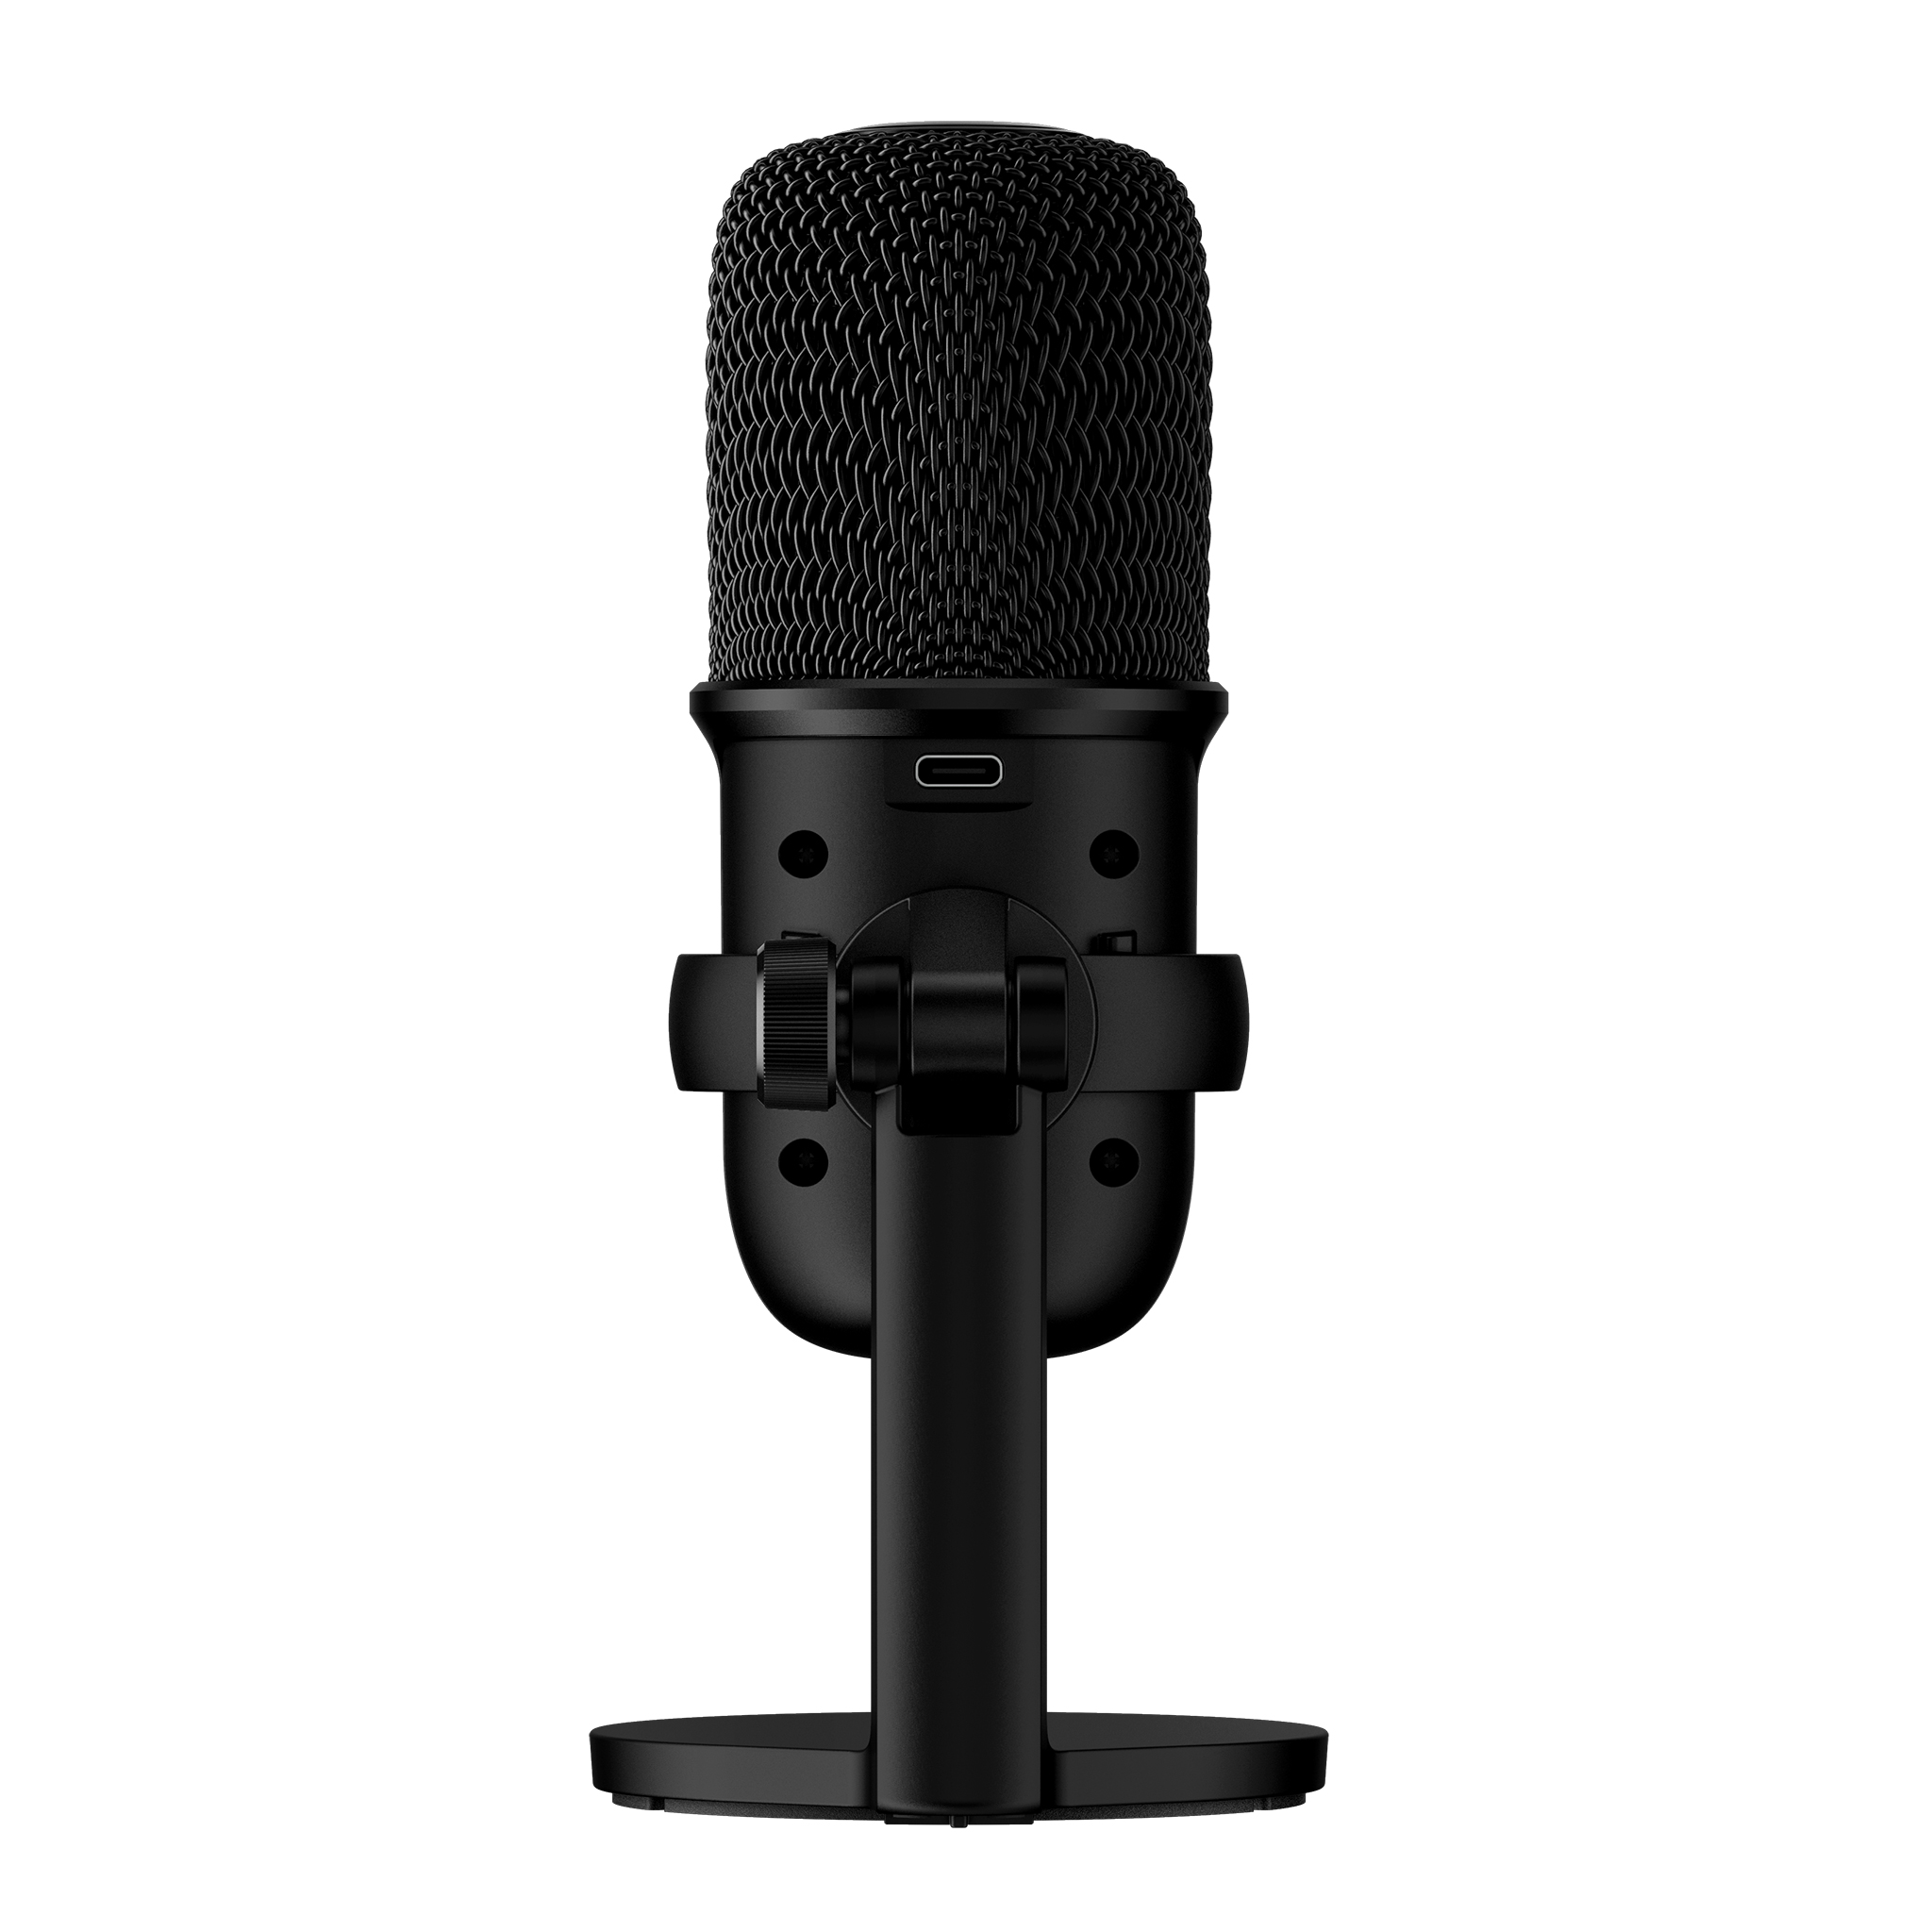 HyperX SoloCast, Microphone for the streaming, Sampling rates: 48 / 44.1 /32 / 16 / 8 kHz, 20Hz-20kHz, Tap-to-Mute sensor with LED indicator, Flexible, Adjustable stand, Cardioid polar pattern, Boom arm and mic stand, Cable length: 2m, Black, USB